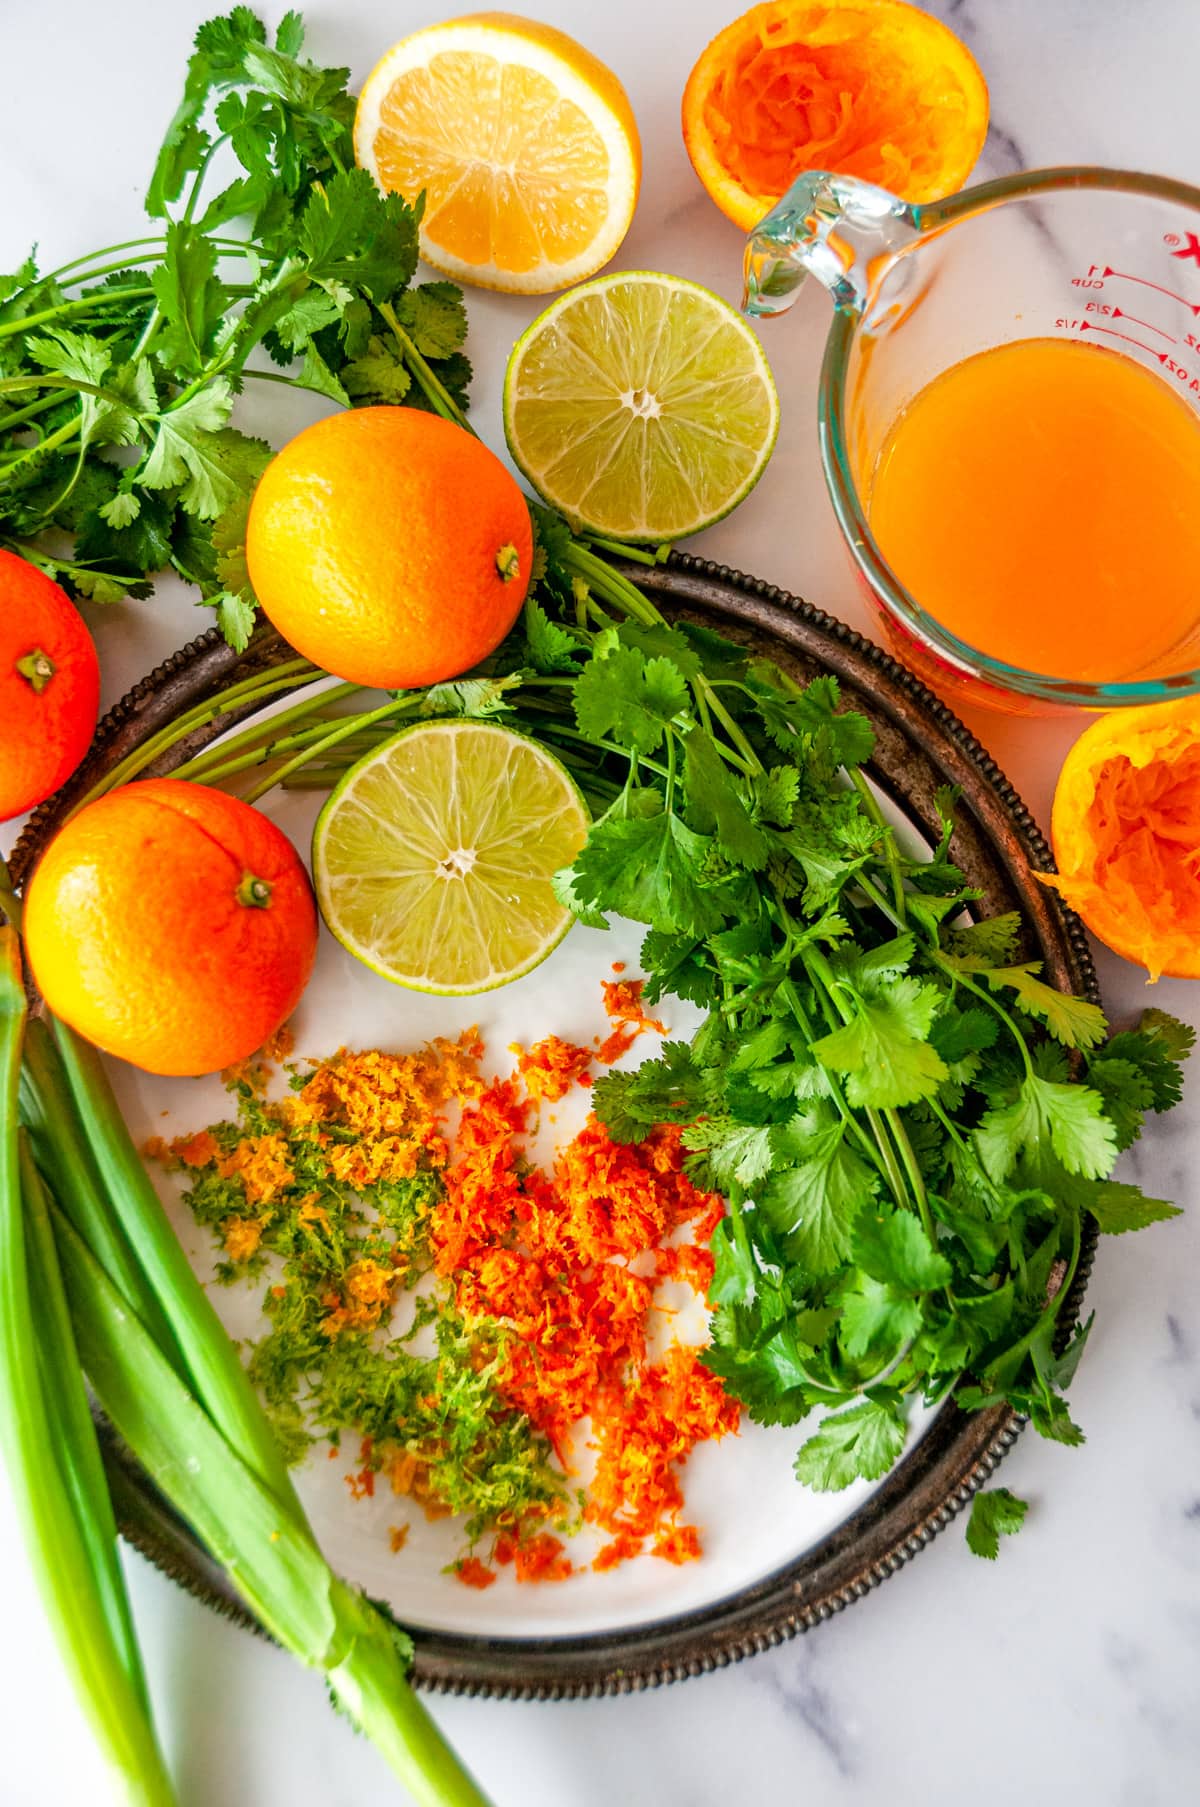 Ingredients for a citrus marinade on white marble: juiced oranges, halved lemons, halved limes, green onion stalks, and cilantro bunch with orange juice and citrus zest.